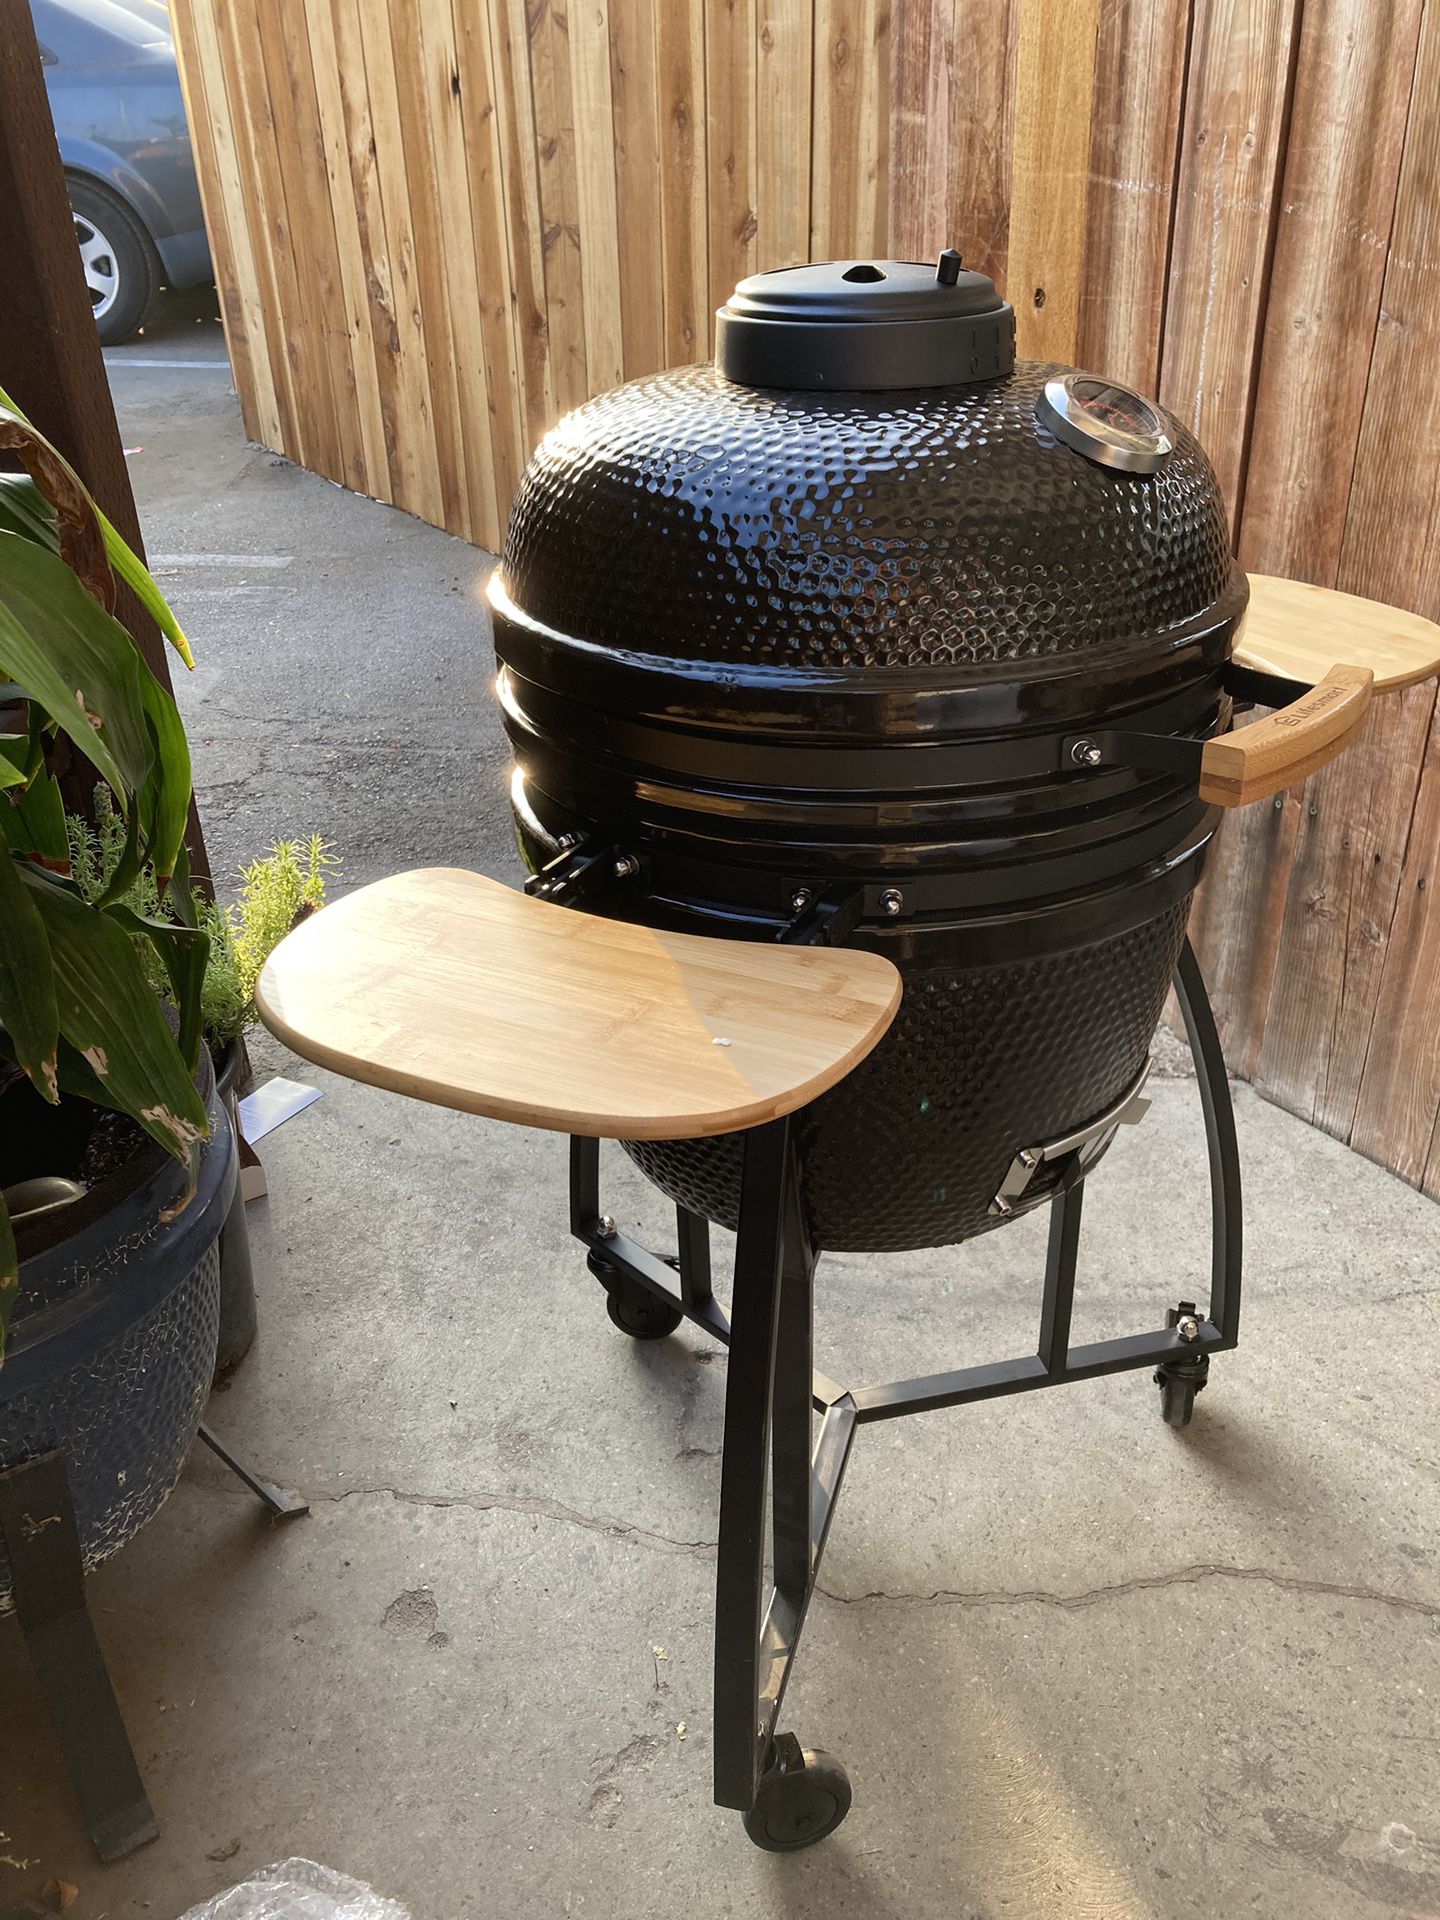 18 Inch Kamado Grill With Accessories for Sale in Irwindale, CA - OfferUp